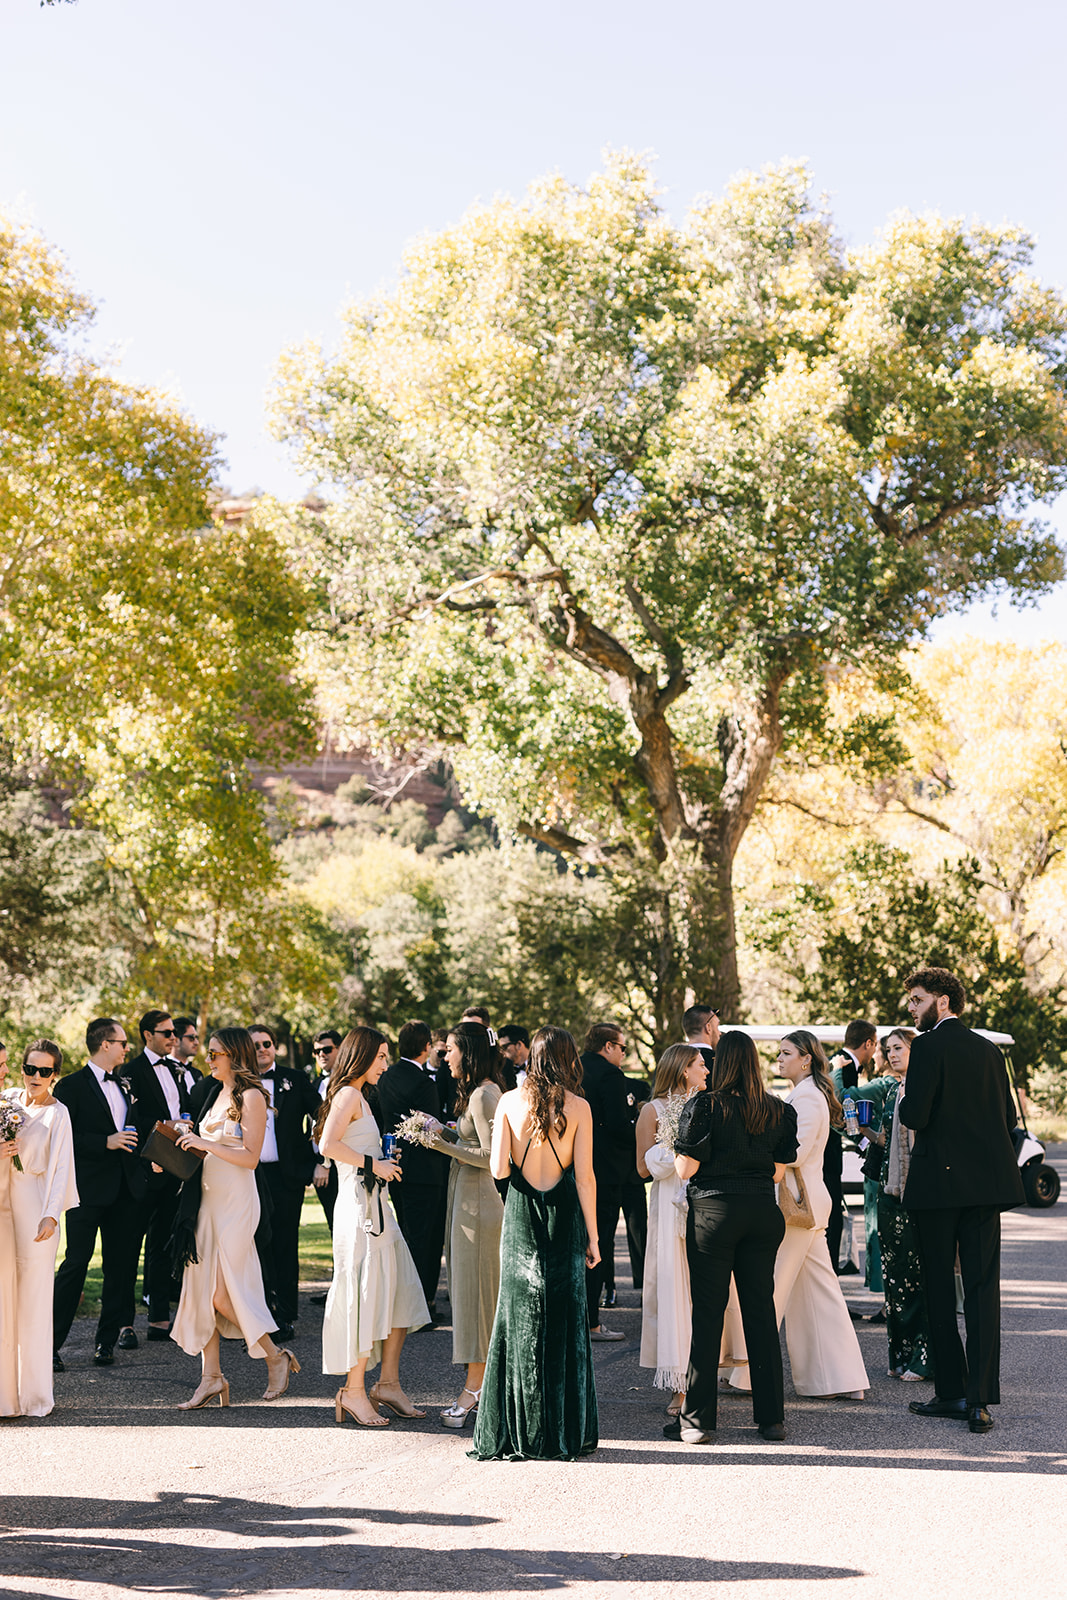 Zoomed out of wedding guests in greens, pinks, and blacks with tall trees 